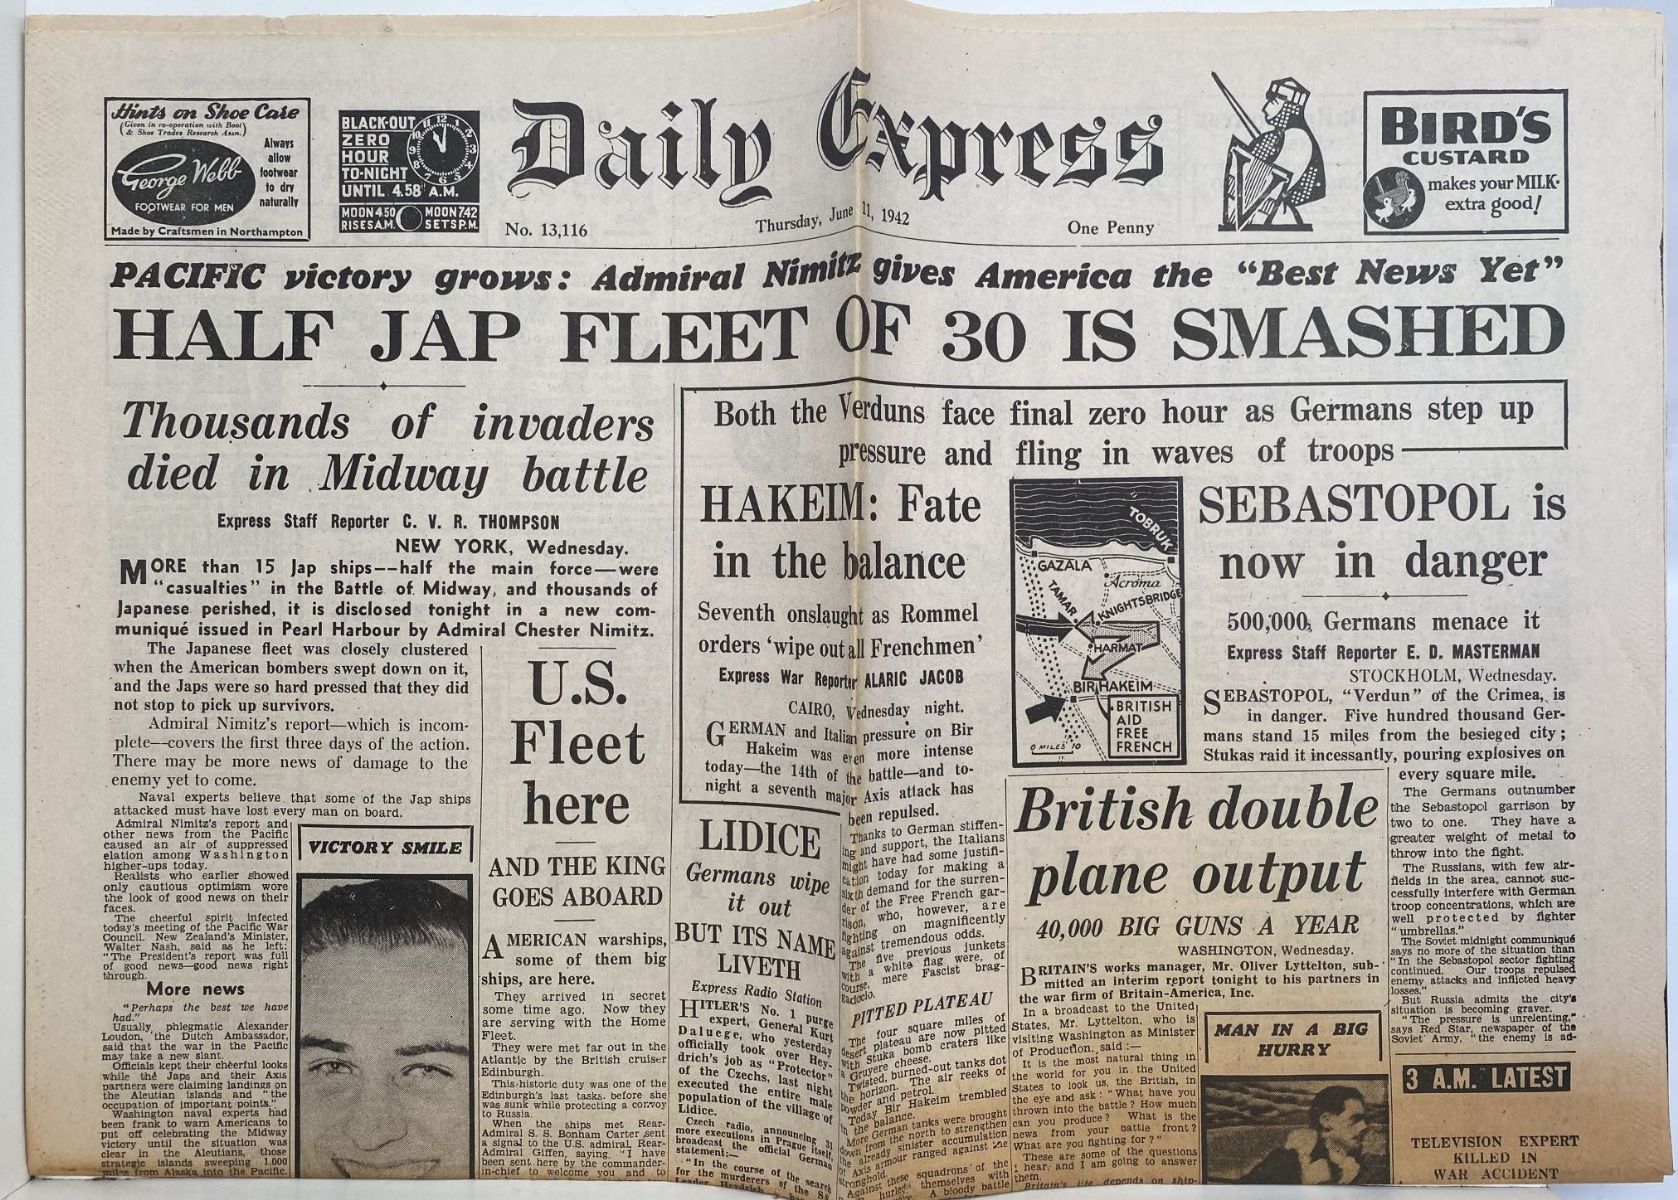 OLD WARTIME NEWSPAPER: Daily Express, Thursday 11th June 1942